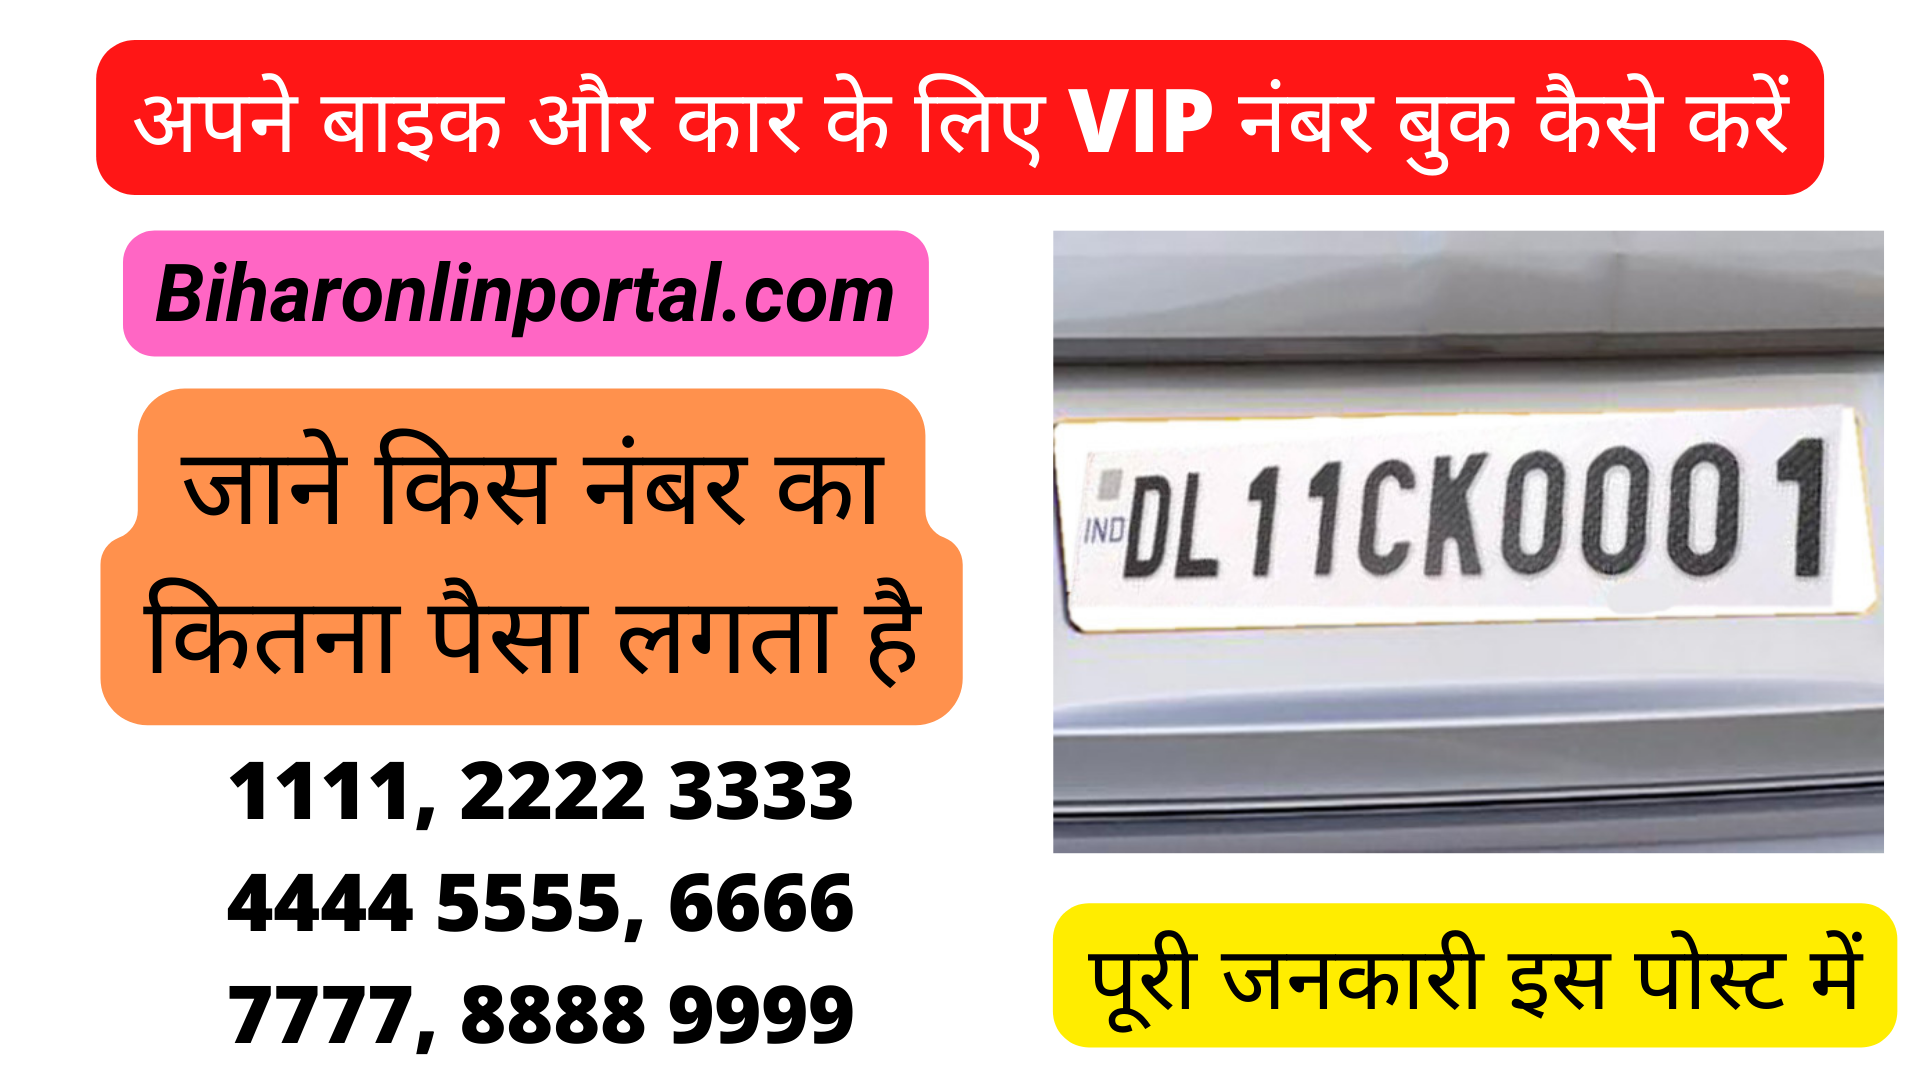 Fancy Vehicle Registration Number, Book RTO VIP Number, Check & Apply